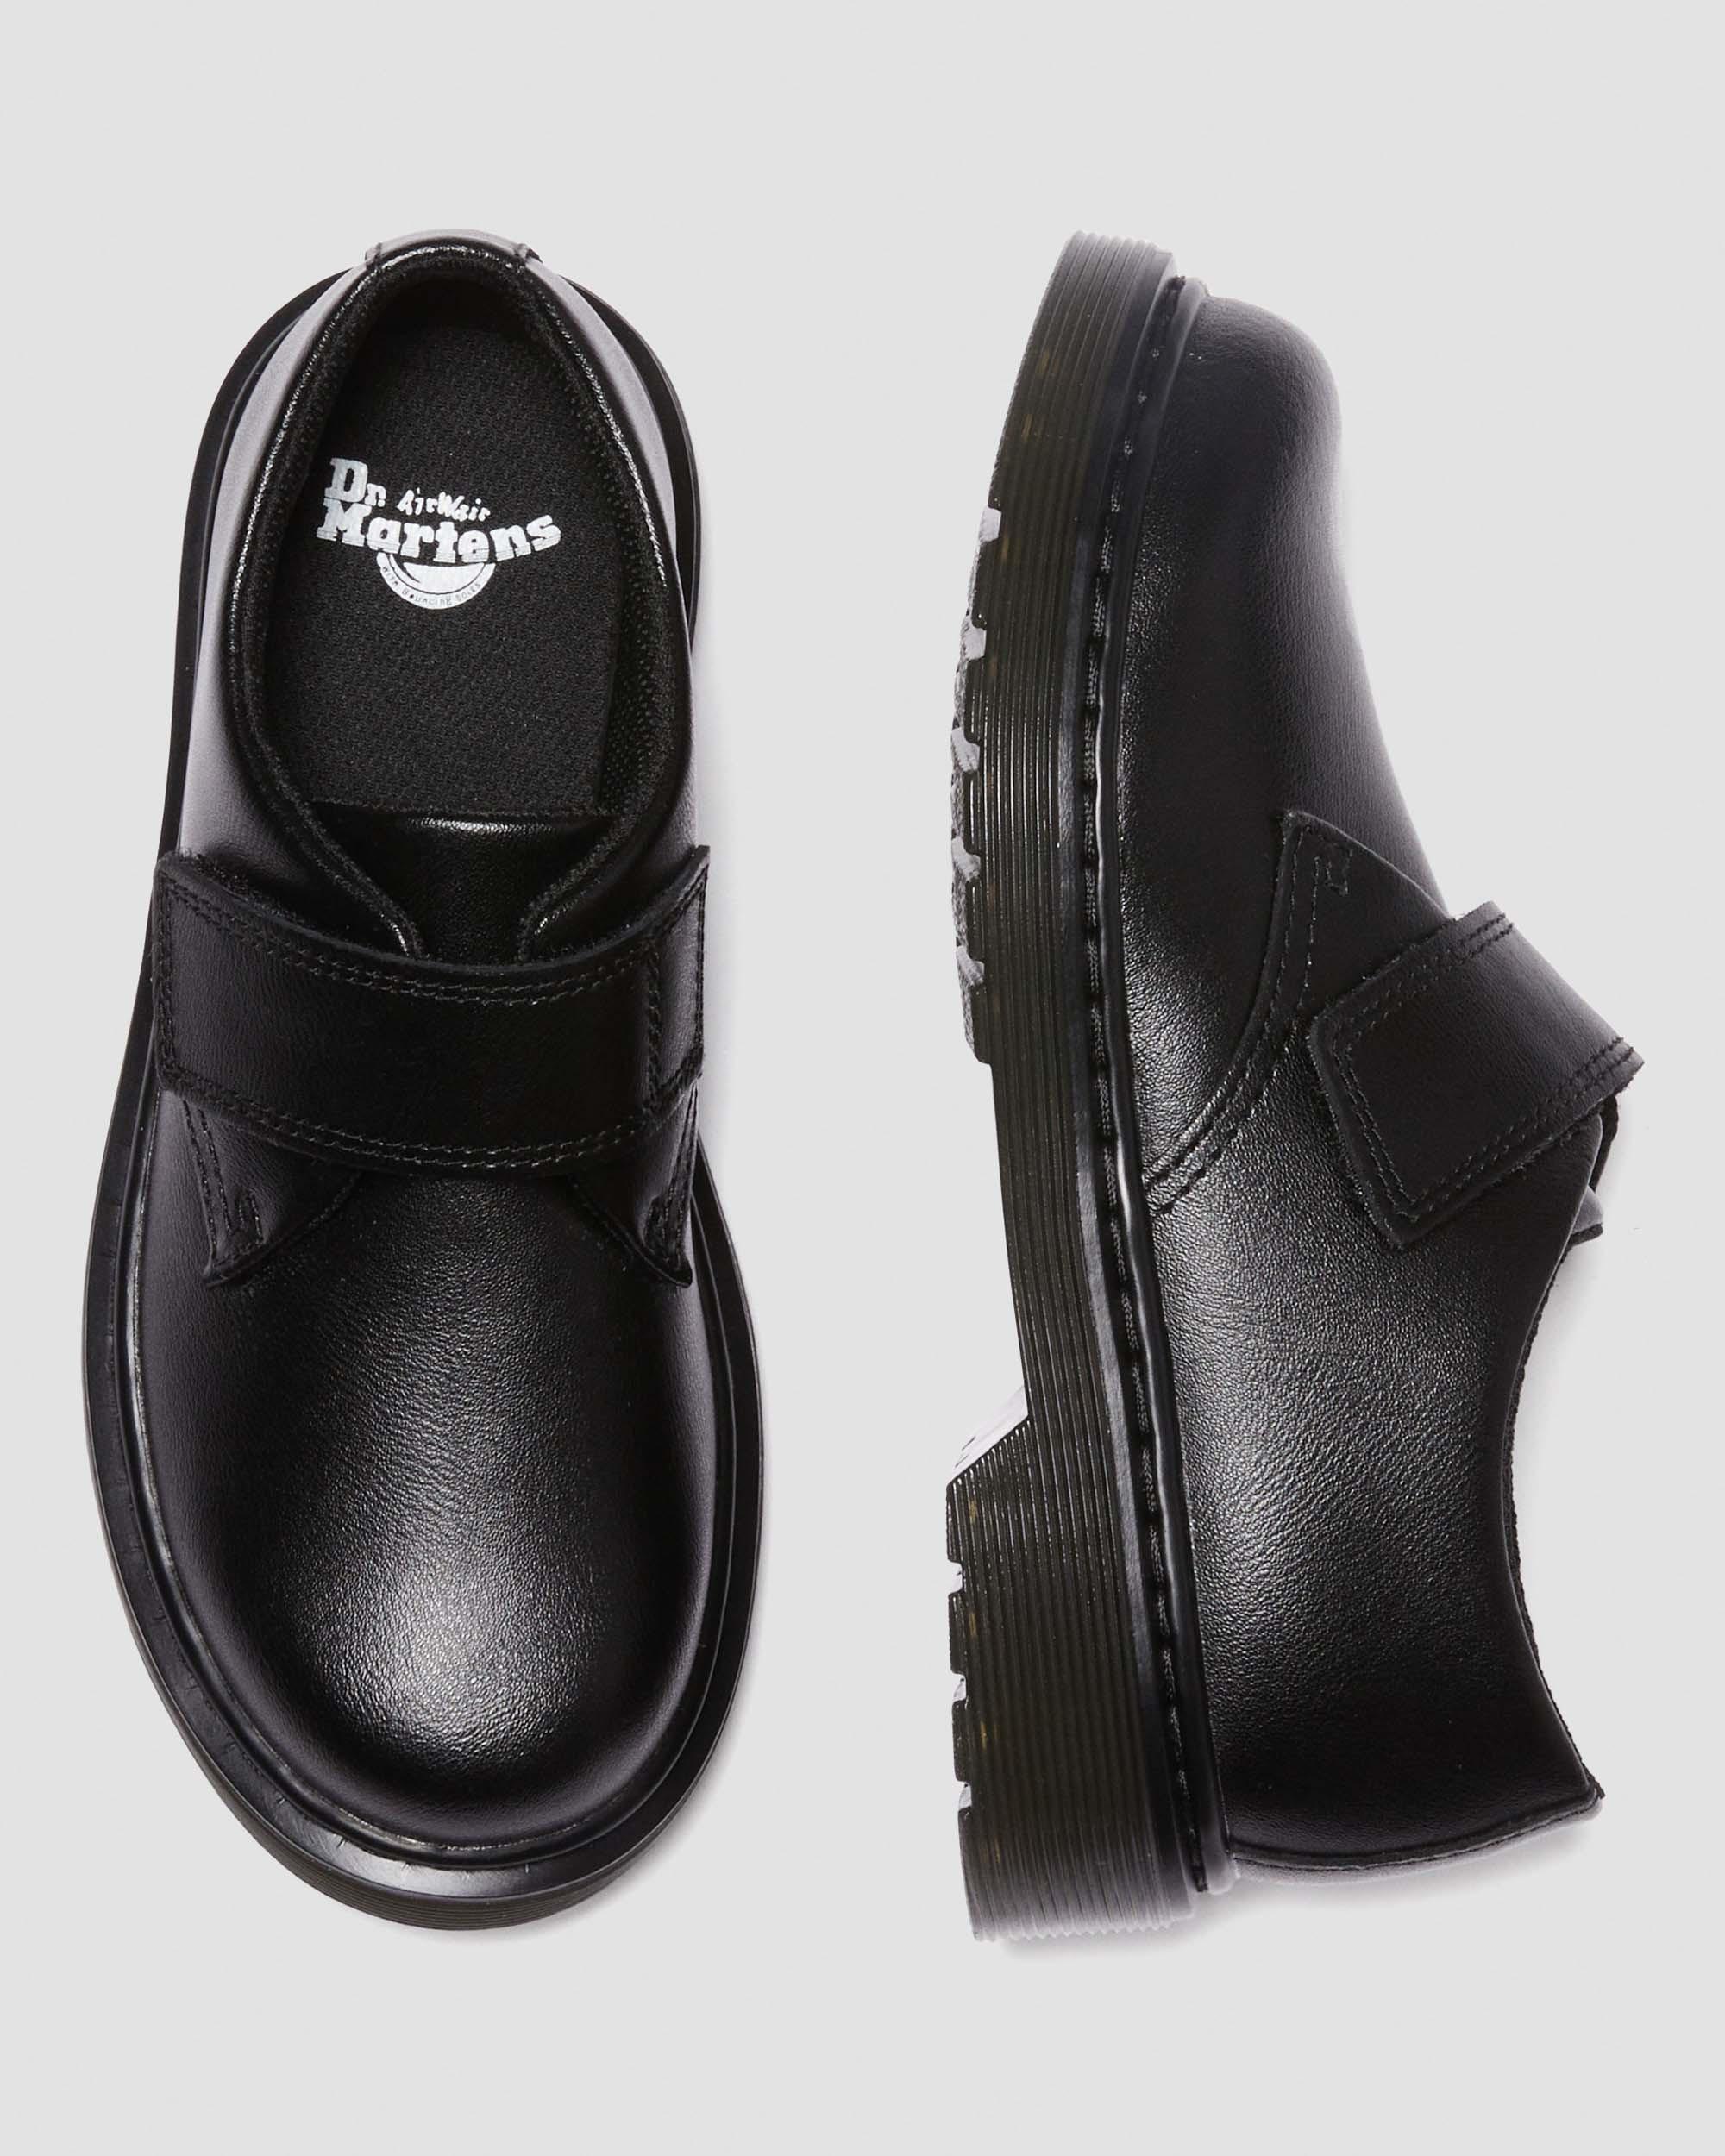 Junior Kamron Leather Strap Velcro Oxford Shoes in Black